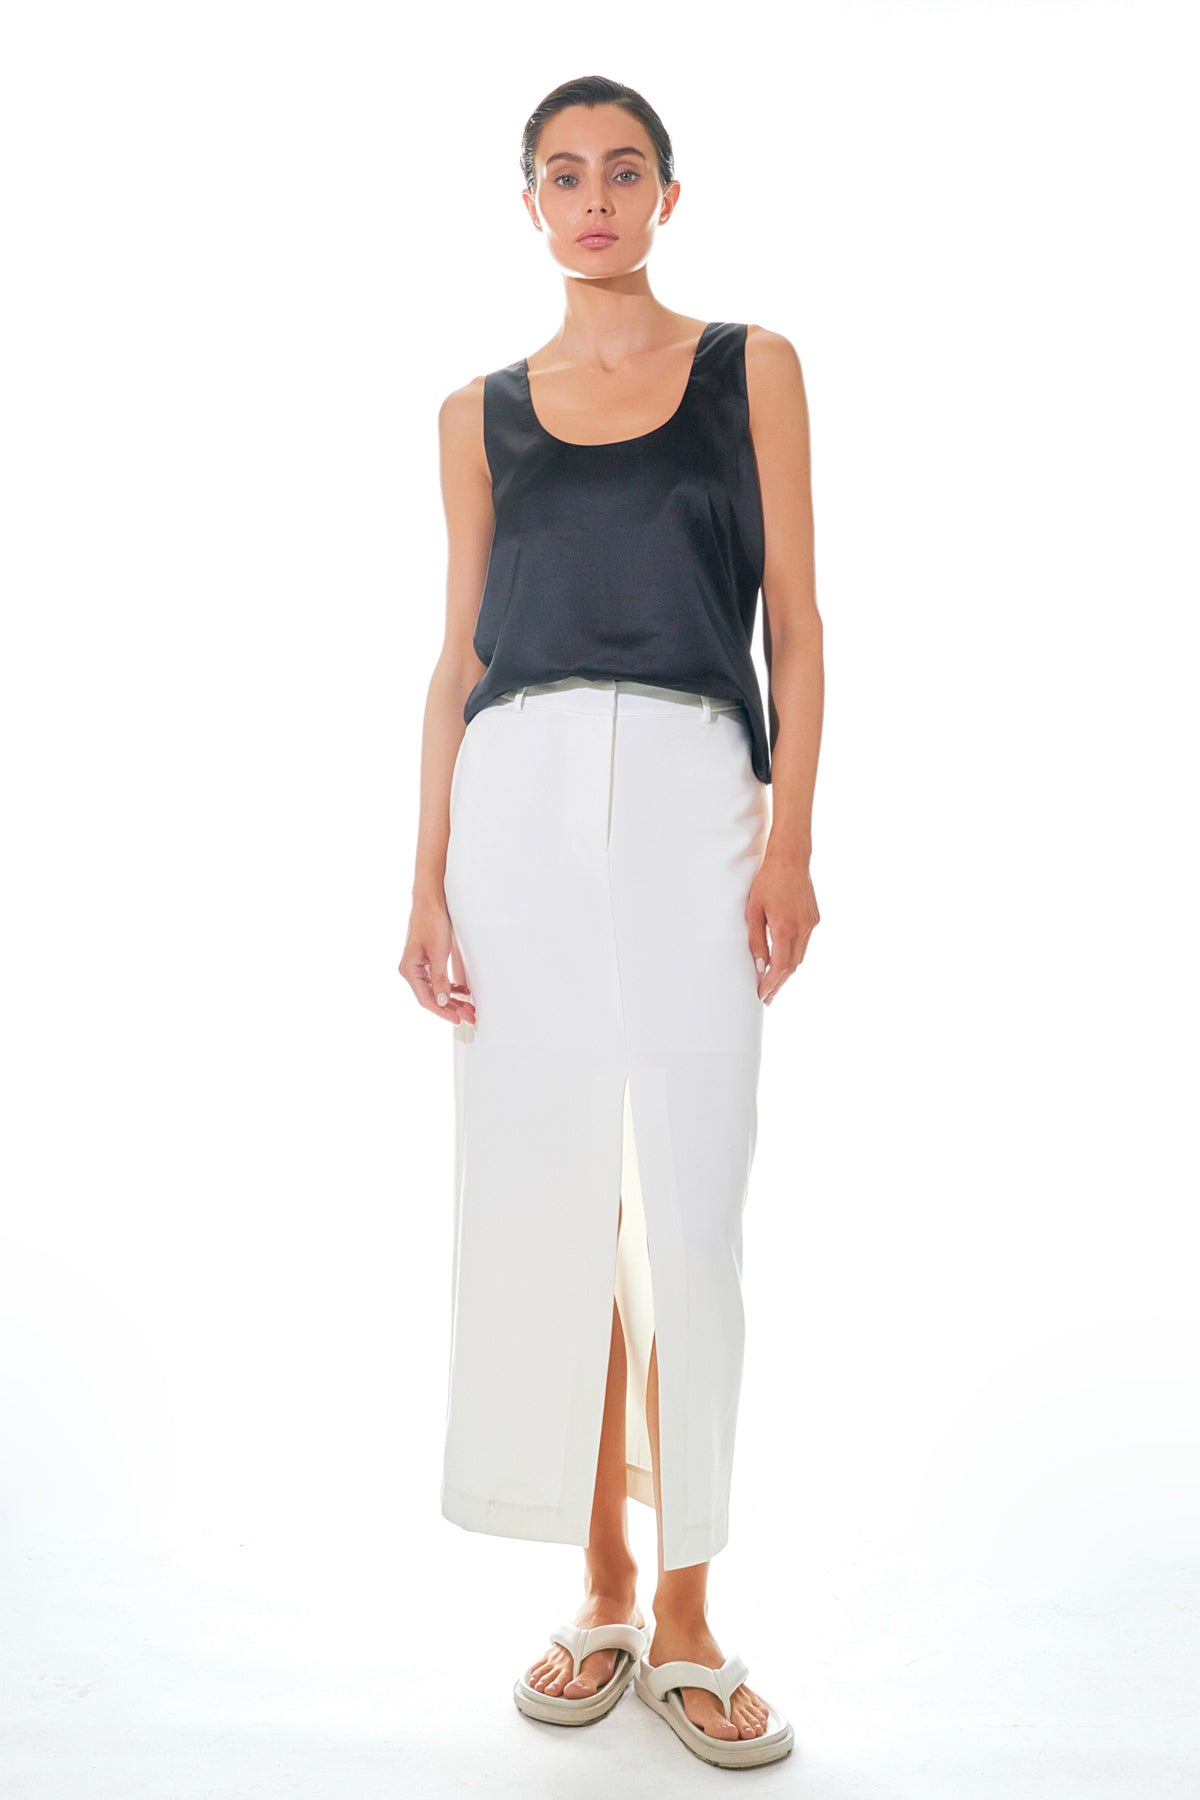 GREY LAB - Satin Sleeveless Top - TOPS available at Objectrare